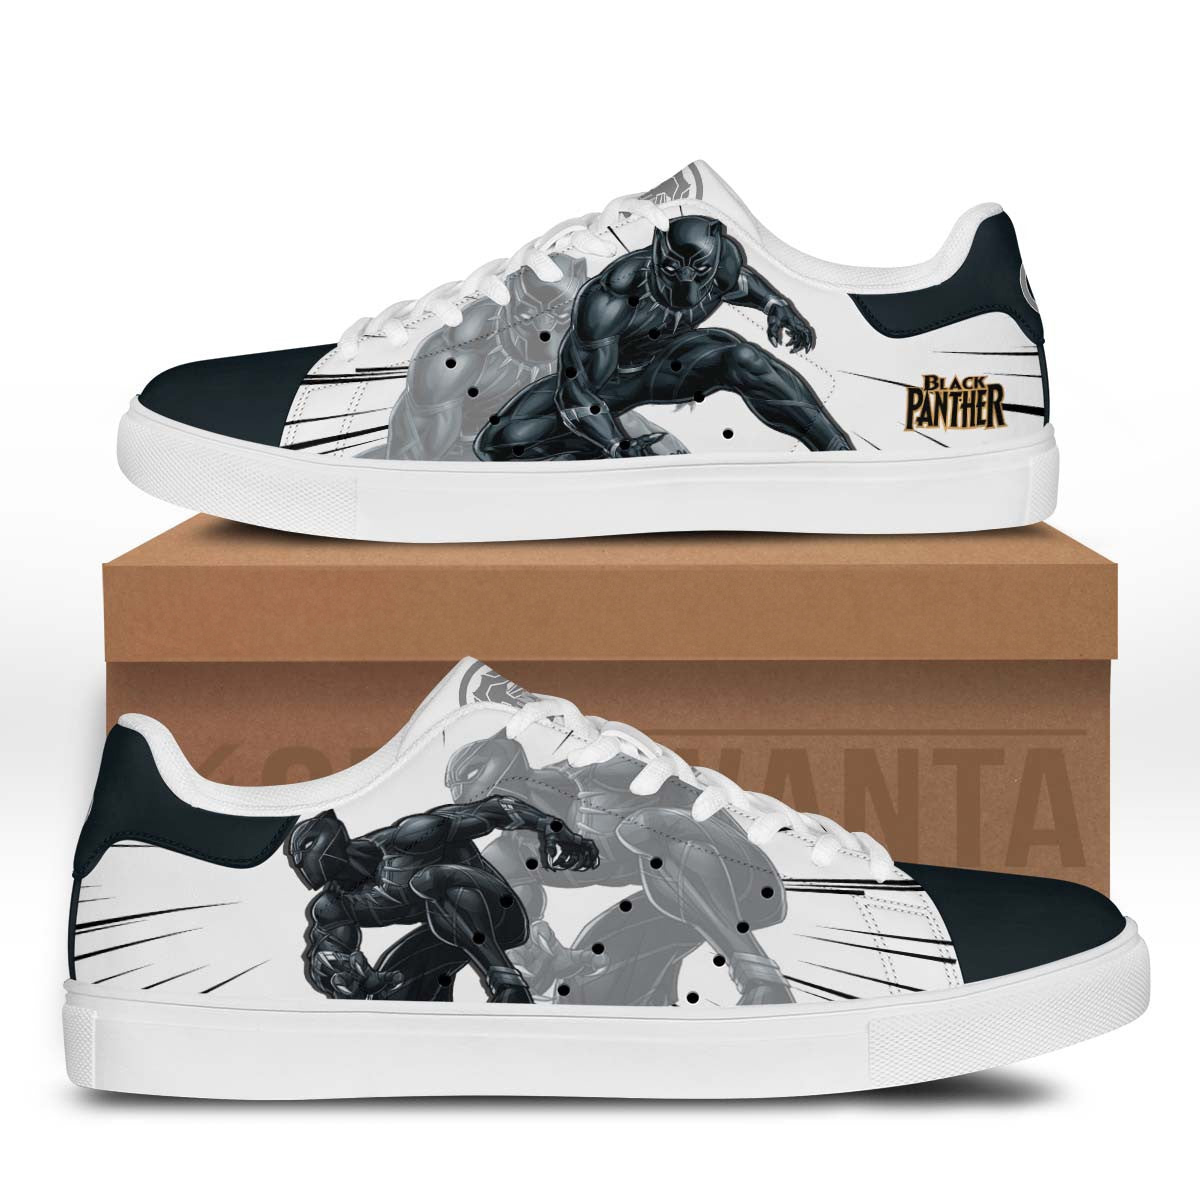 Avengers Black Panther Stan Shoes Custom